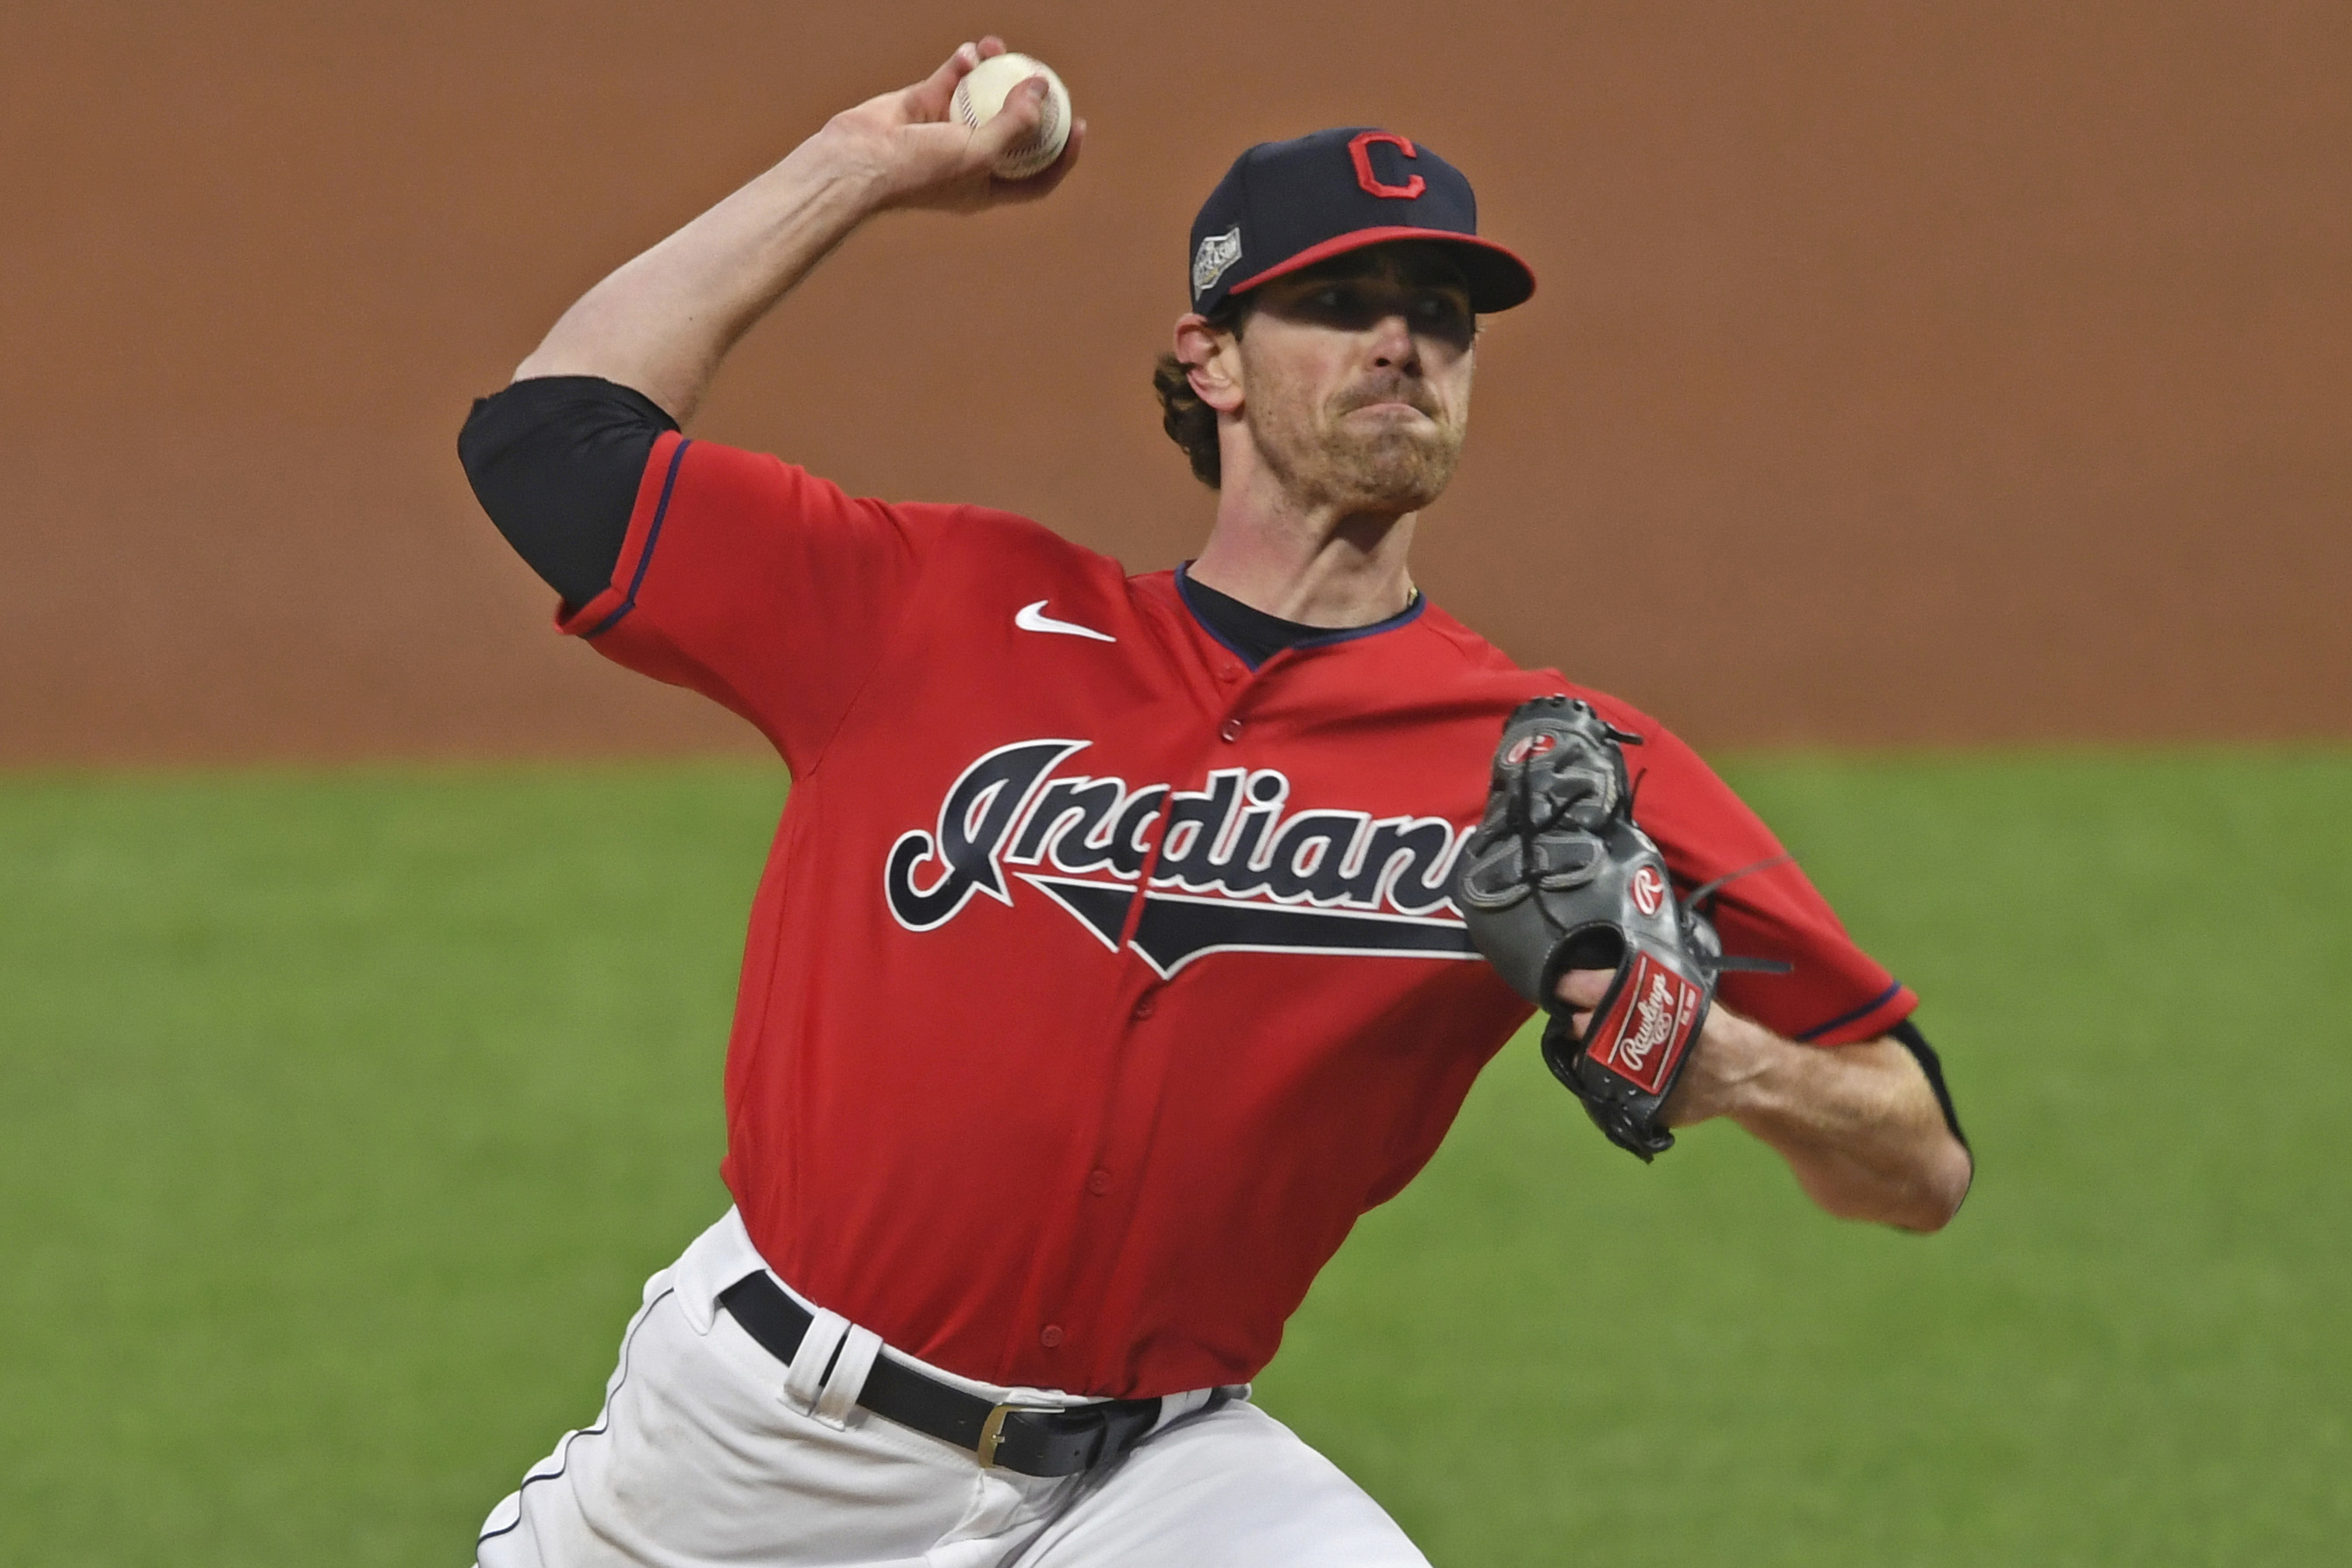 Cleveland ace Shane Bieber seeing goal of pitching deeper into